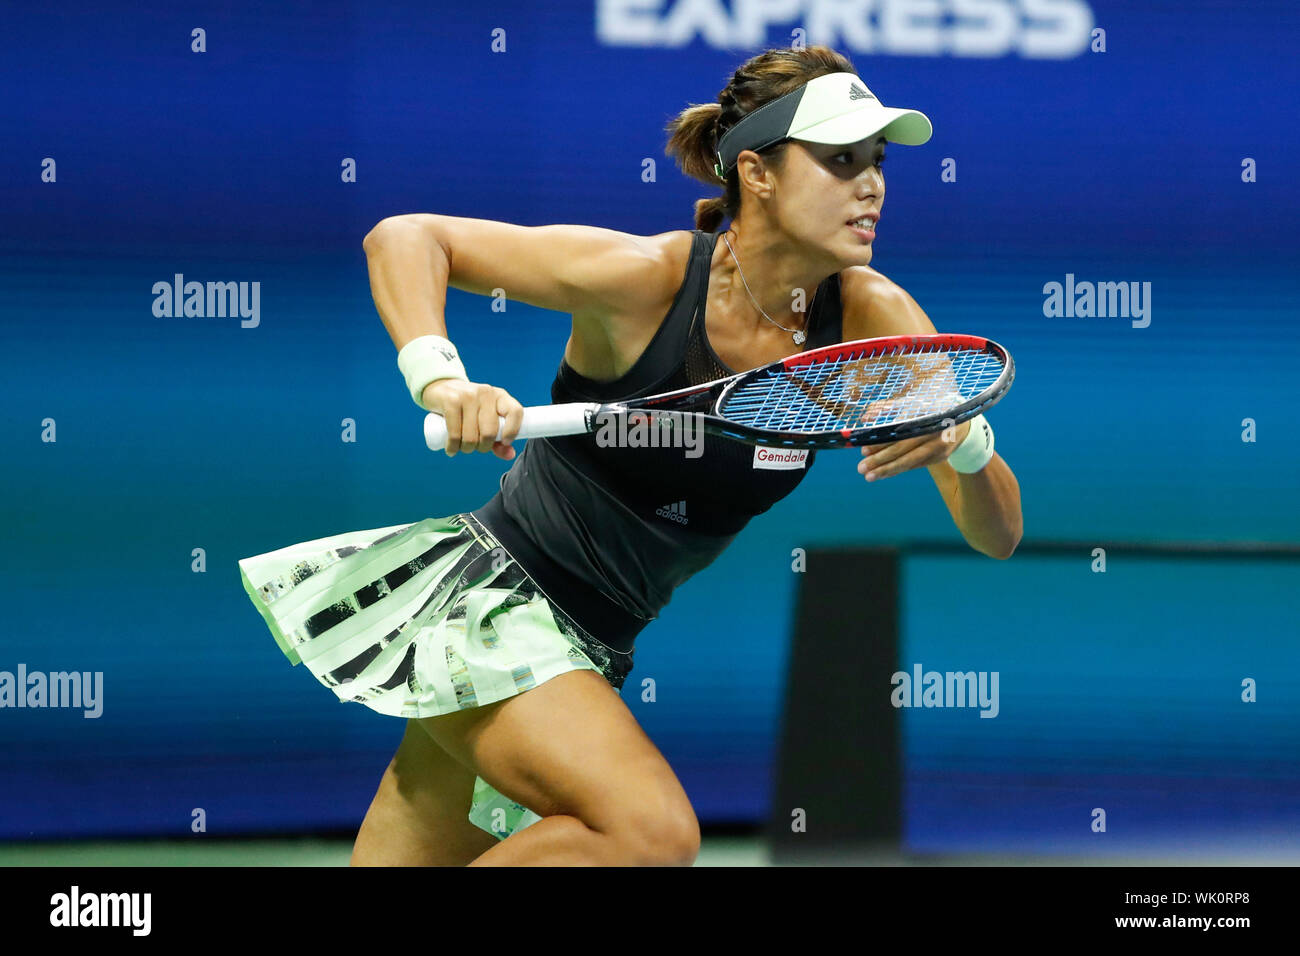 New York, USA. 3rd Sep, 2019. Wang Qiang competes during the women's singles quarterfinal match between Wang Qiang of China and Serena Williams of the United States at the 2019 US Open in New York, the United States, Sept. 3, 2019. Credit: Li Muzi/Xinhua/Alamy Live News Stock Photo